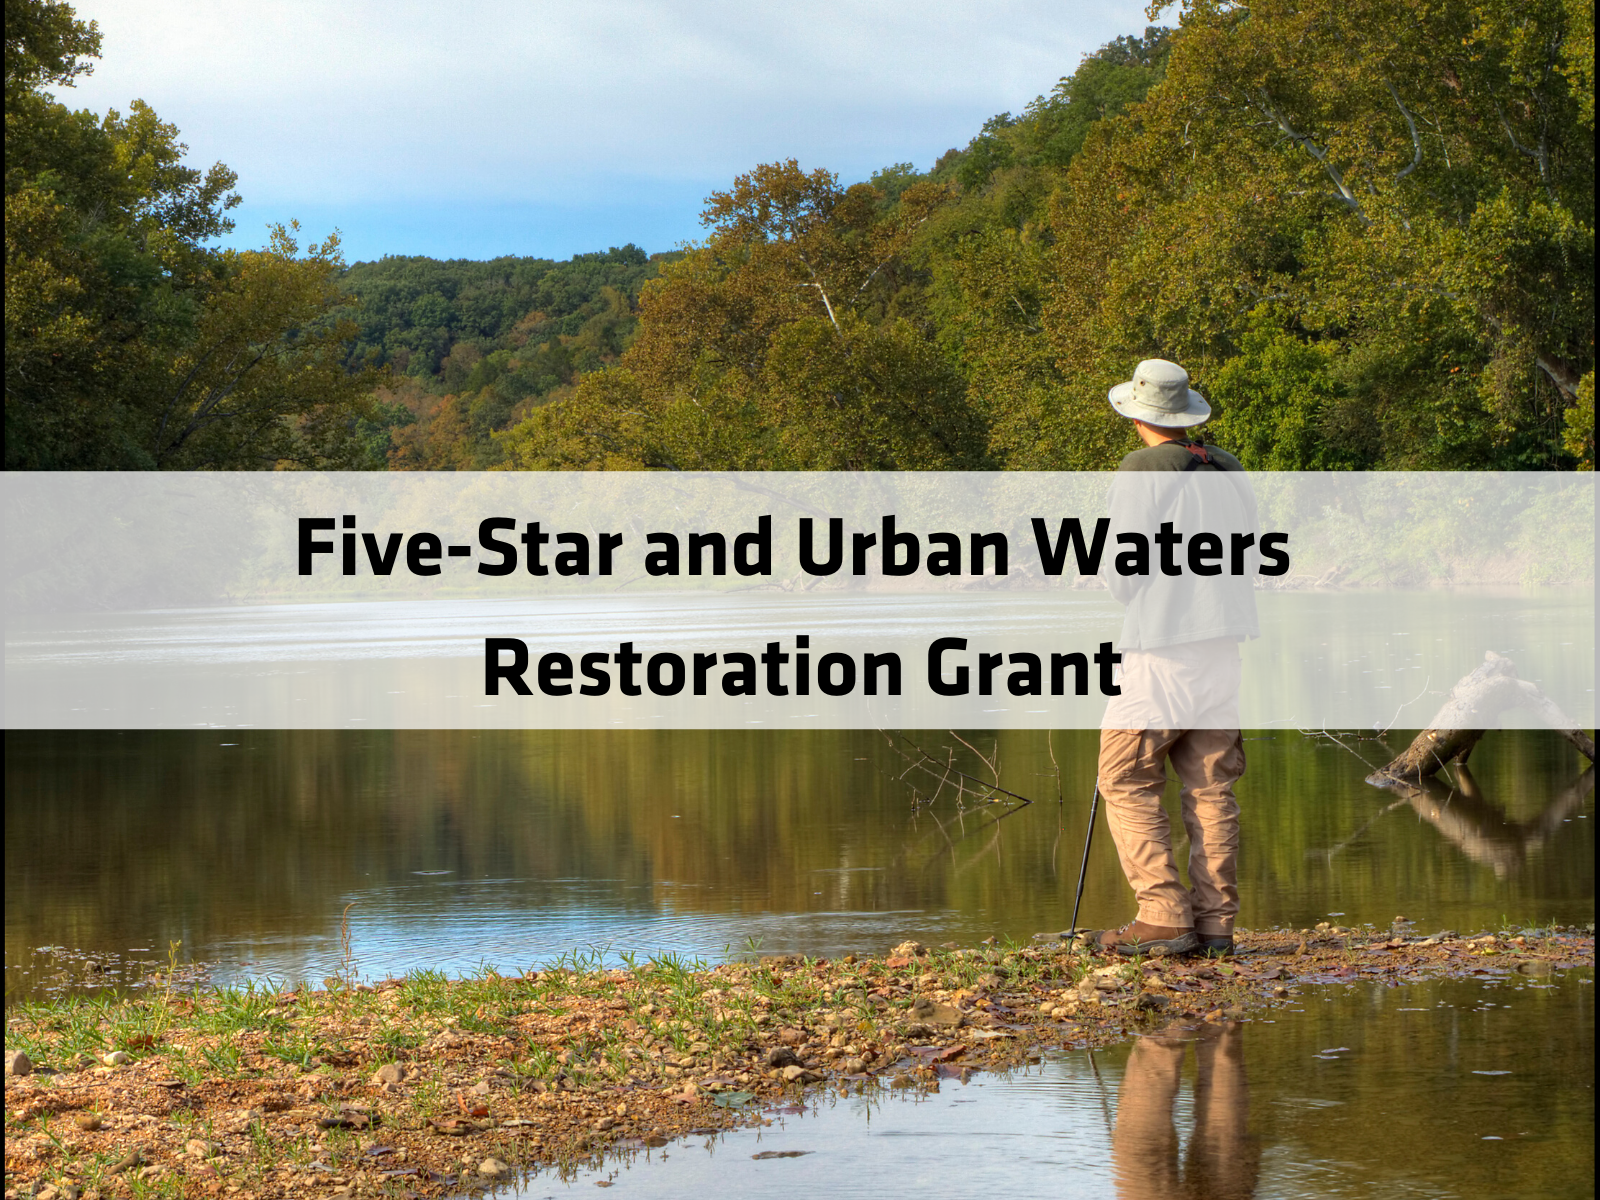 Five-Star and Urban Waters Restoration Grant